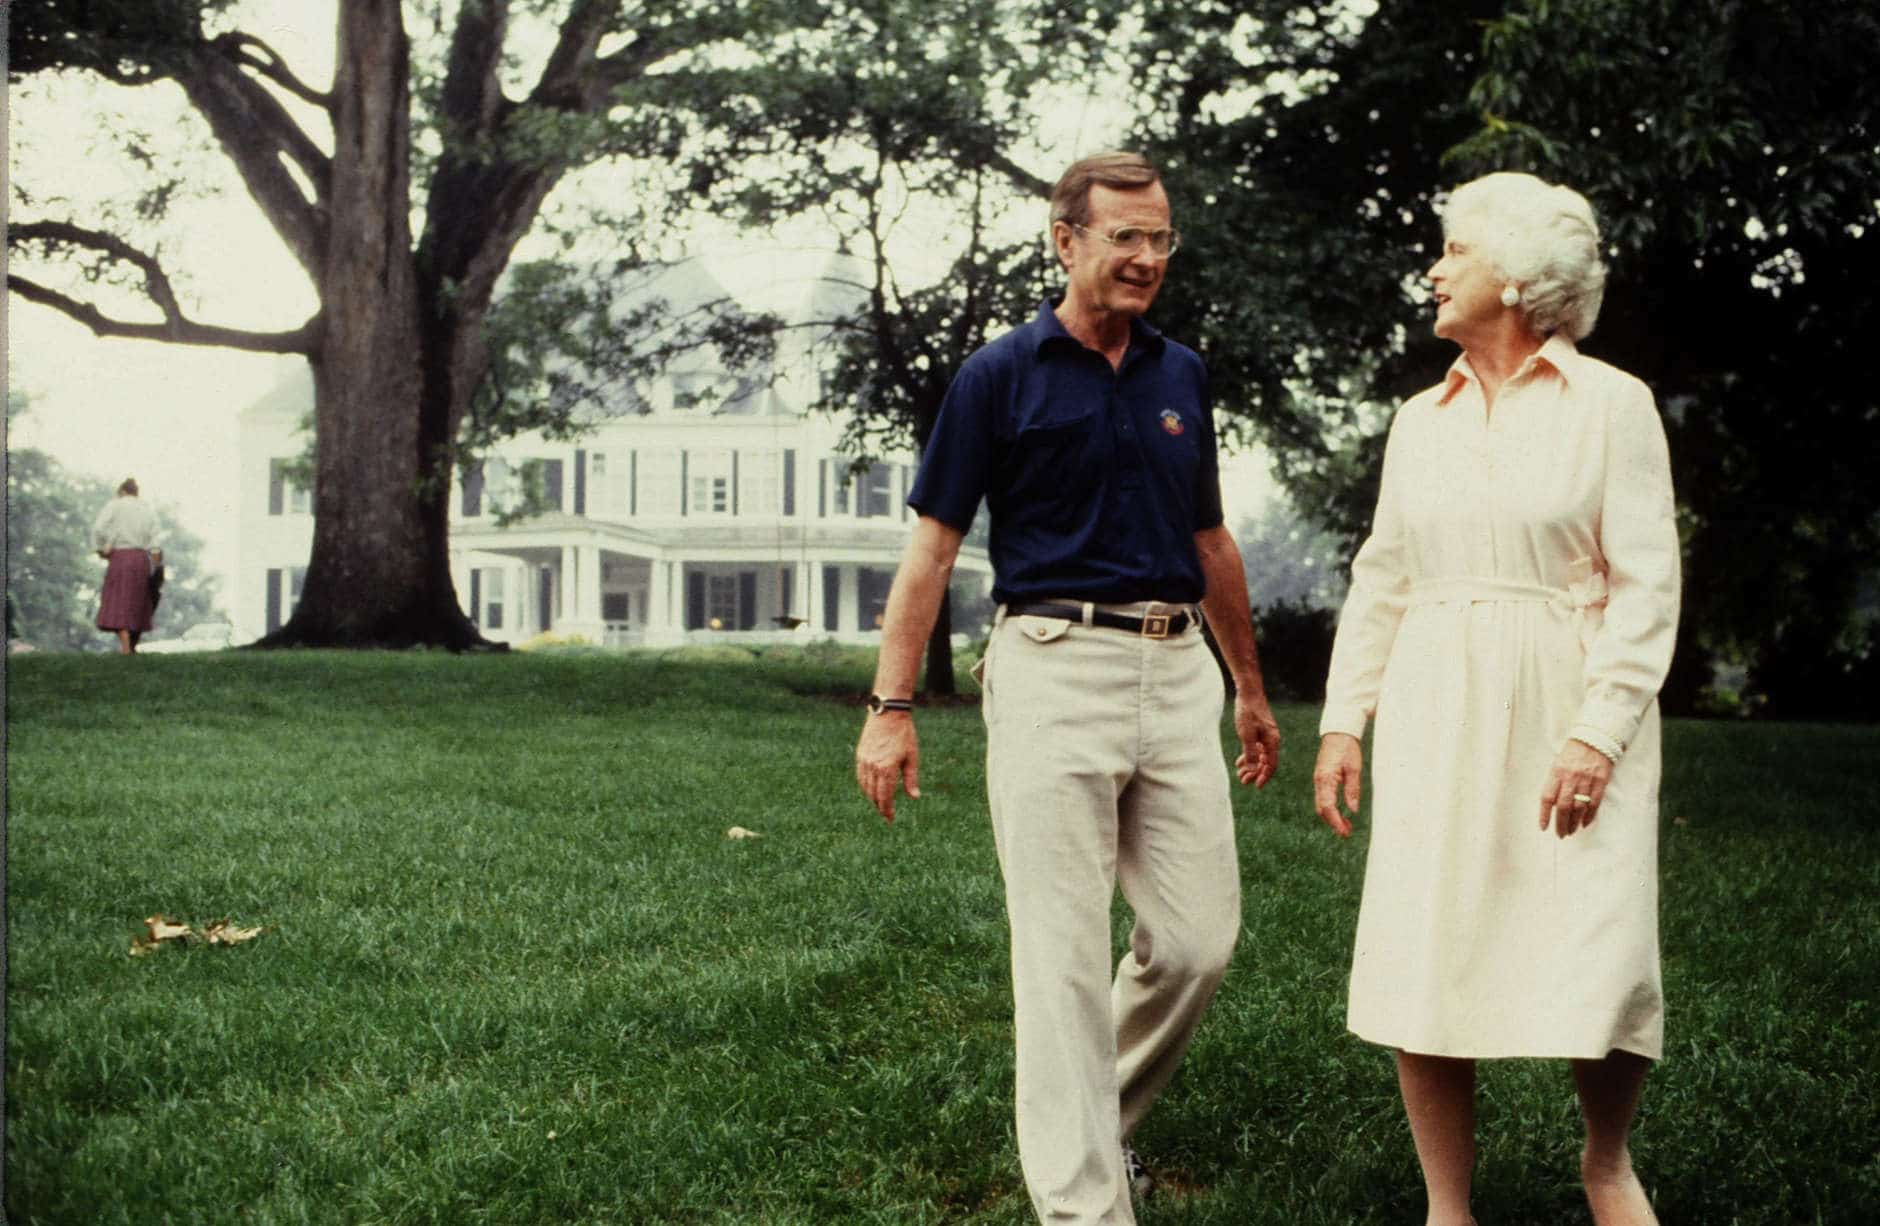 Vice President George H.W. Bush and Barbara Bush relax at the Vice President's mansion in August 1982.

Photograph by Dennis Brack BBBs 20